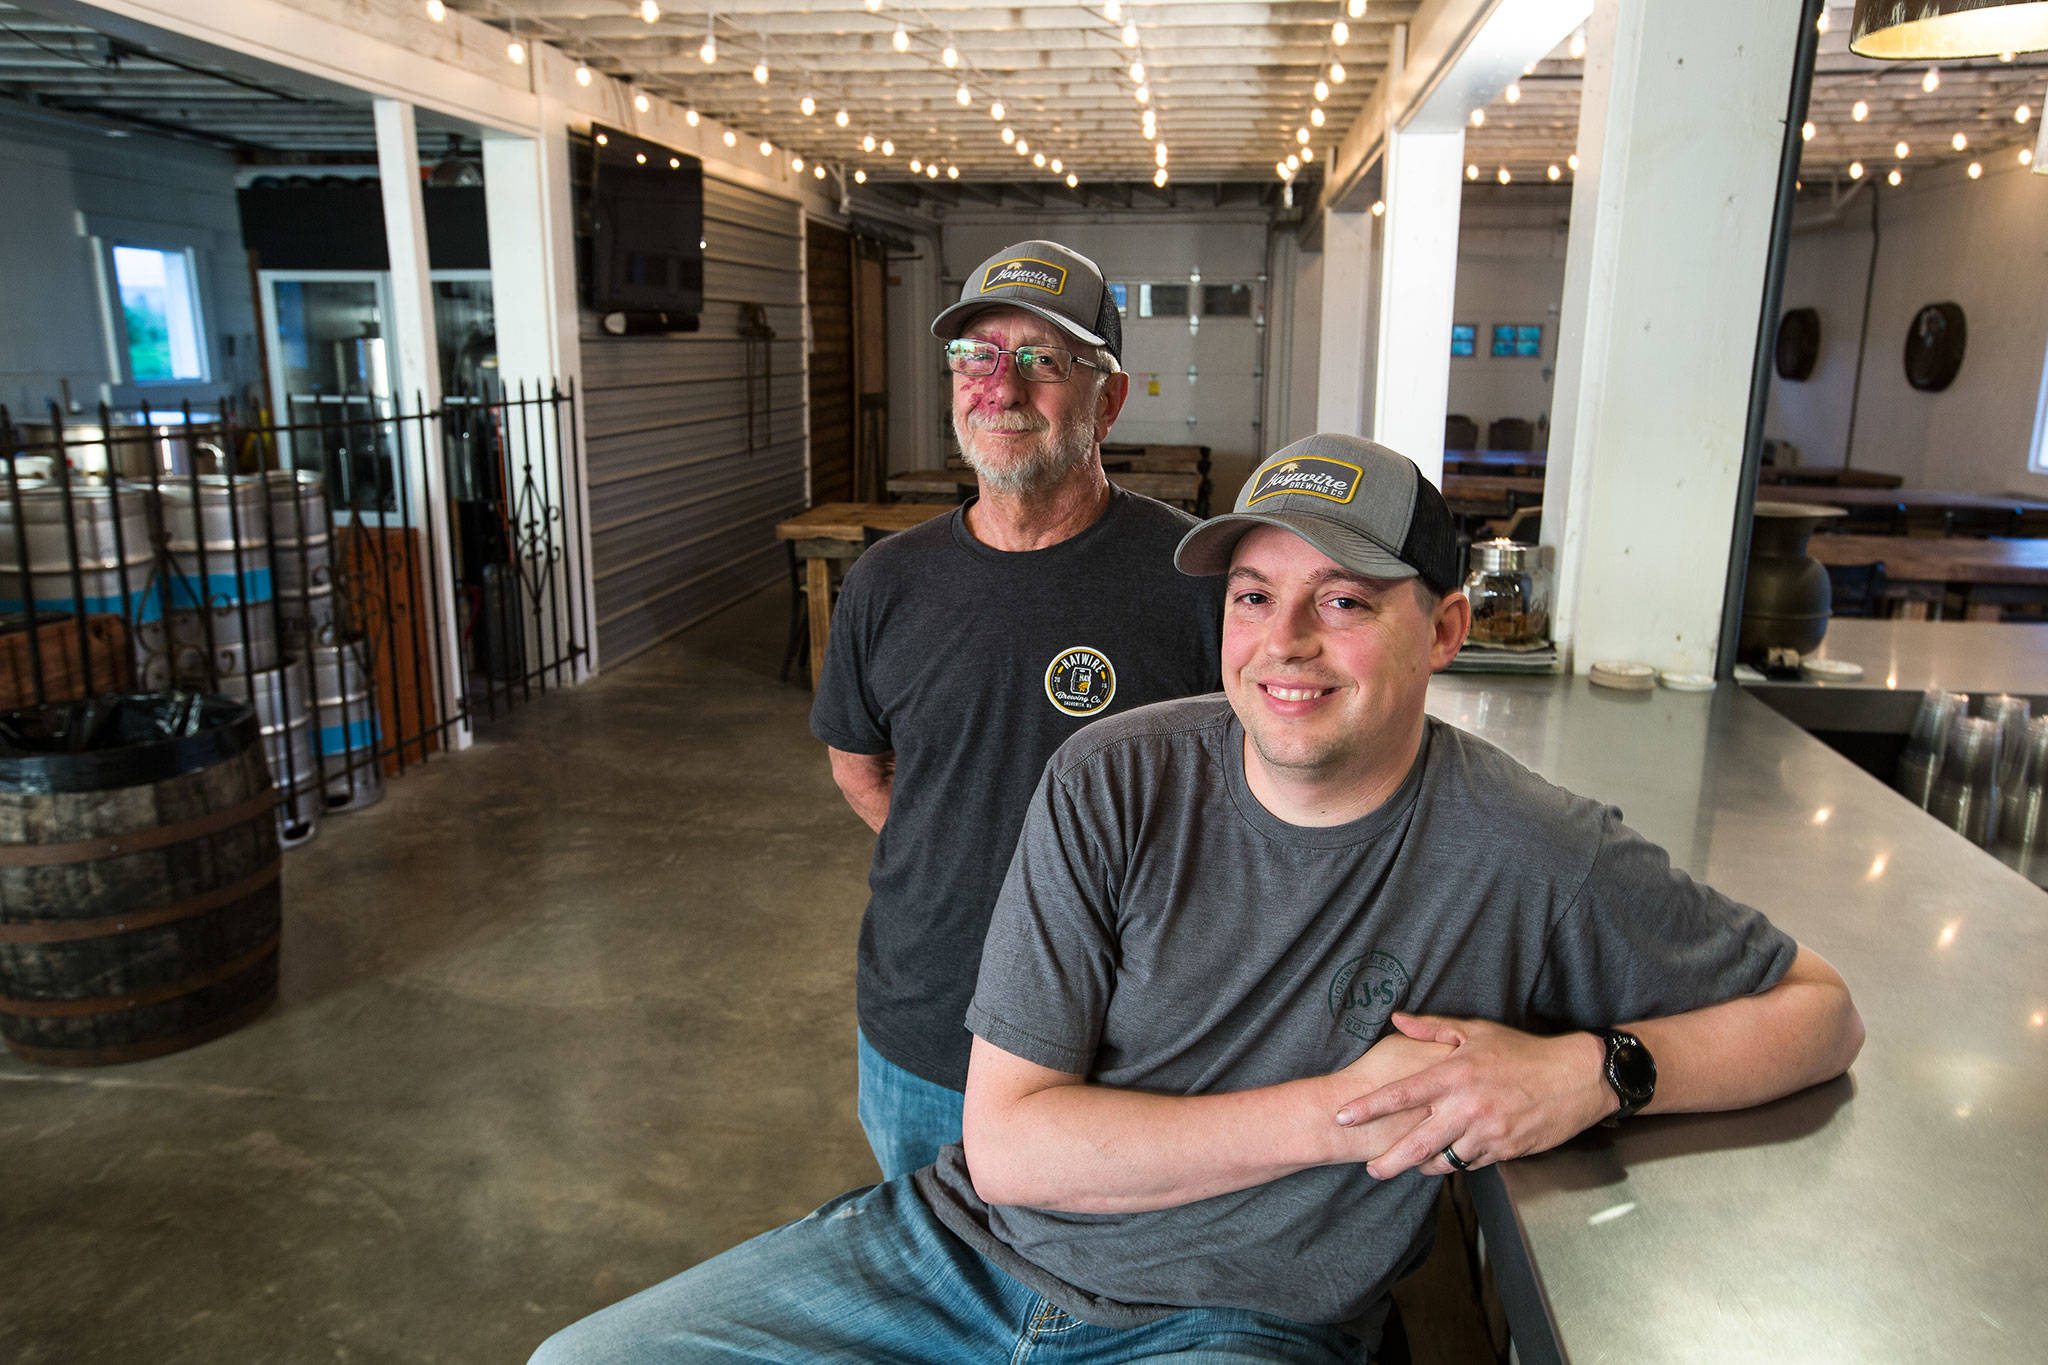 Owner/brewers David Jez and Bryant Castle sit in the main room of Haywire Brewing Co. on May 23 in Snohomish. (Andy Bronson / The Herald)